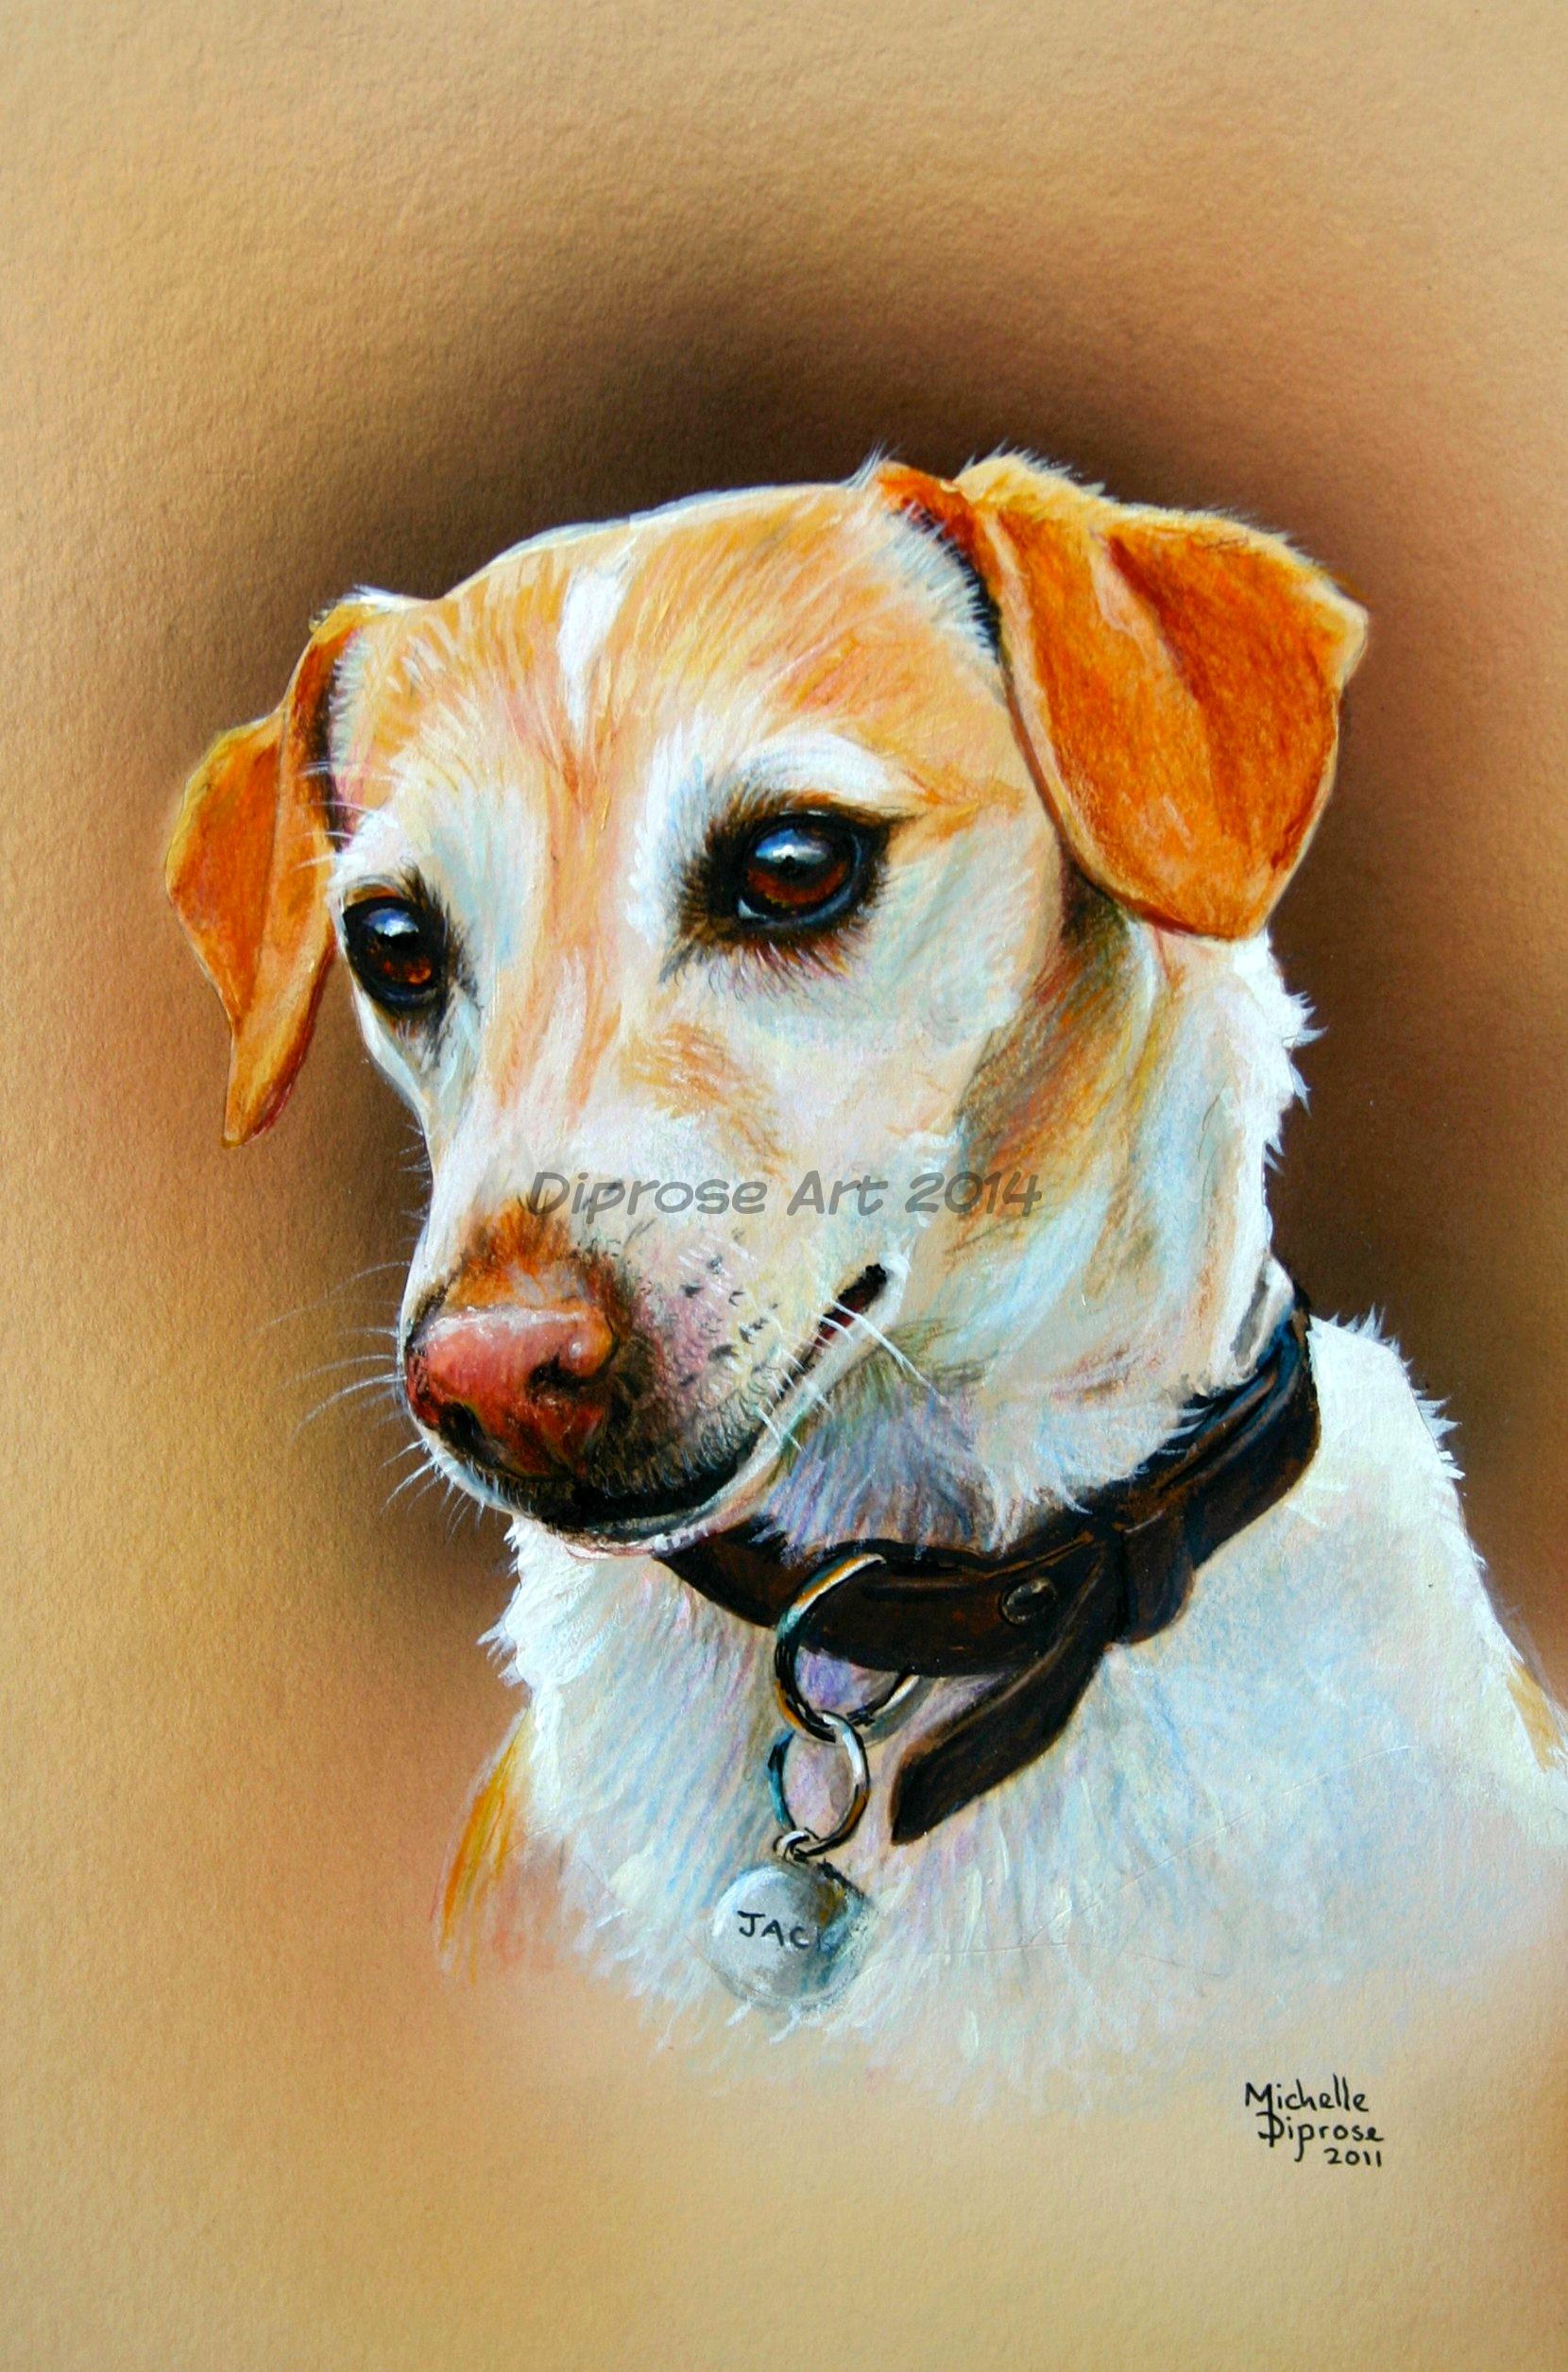 acrylics on board - approx A4 - Jack is a lovely golden Jack Russell terrier and his mum&#039;s special lad